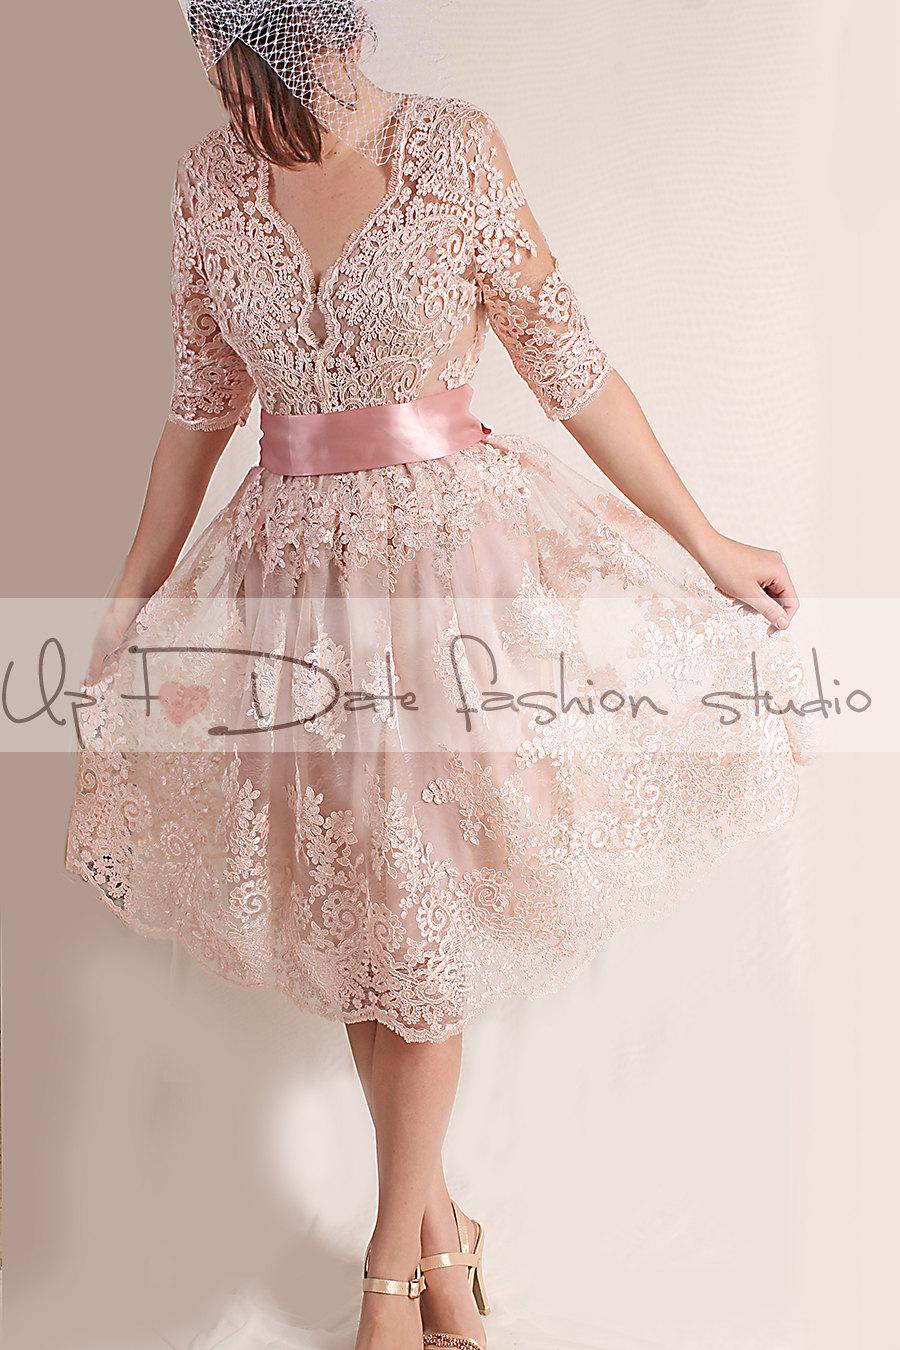 Mariage - Party/Cocktail /evening/knee length /alencon lace dress/open back/ blush pink dress